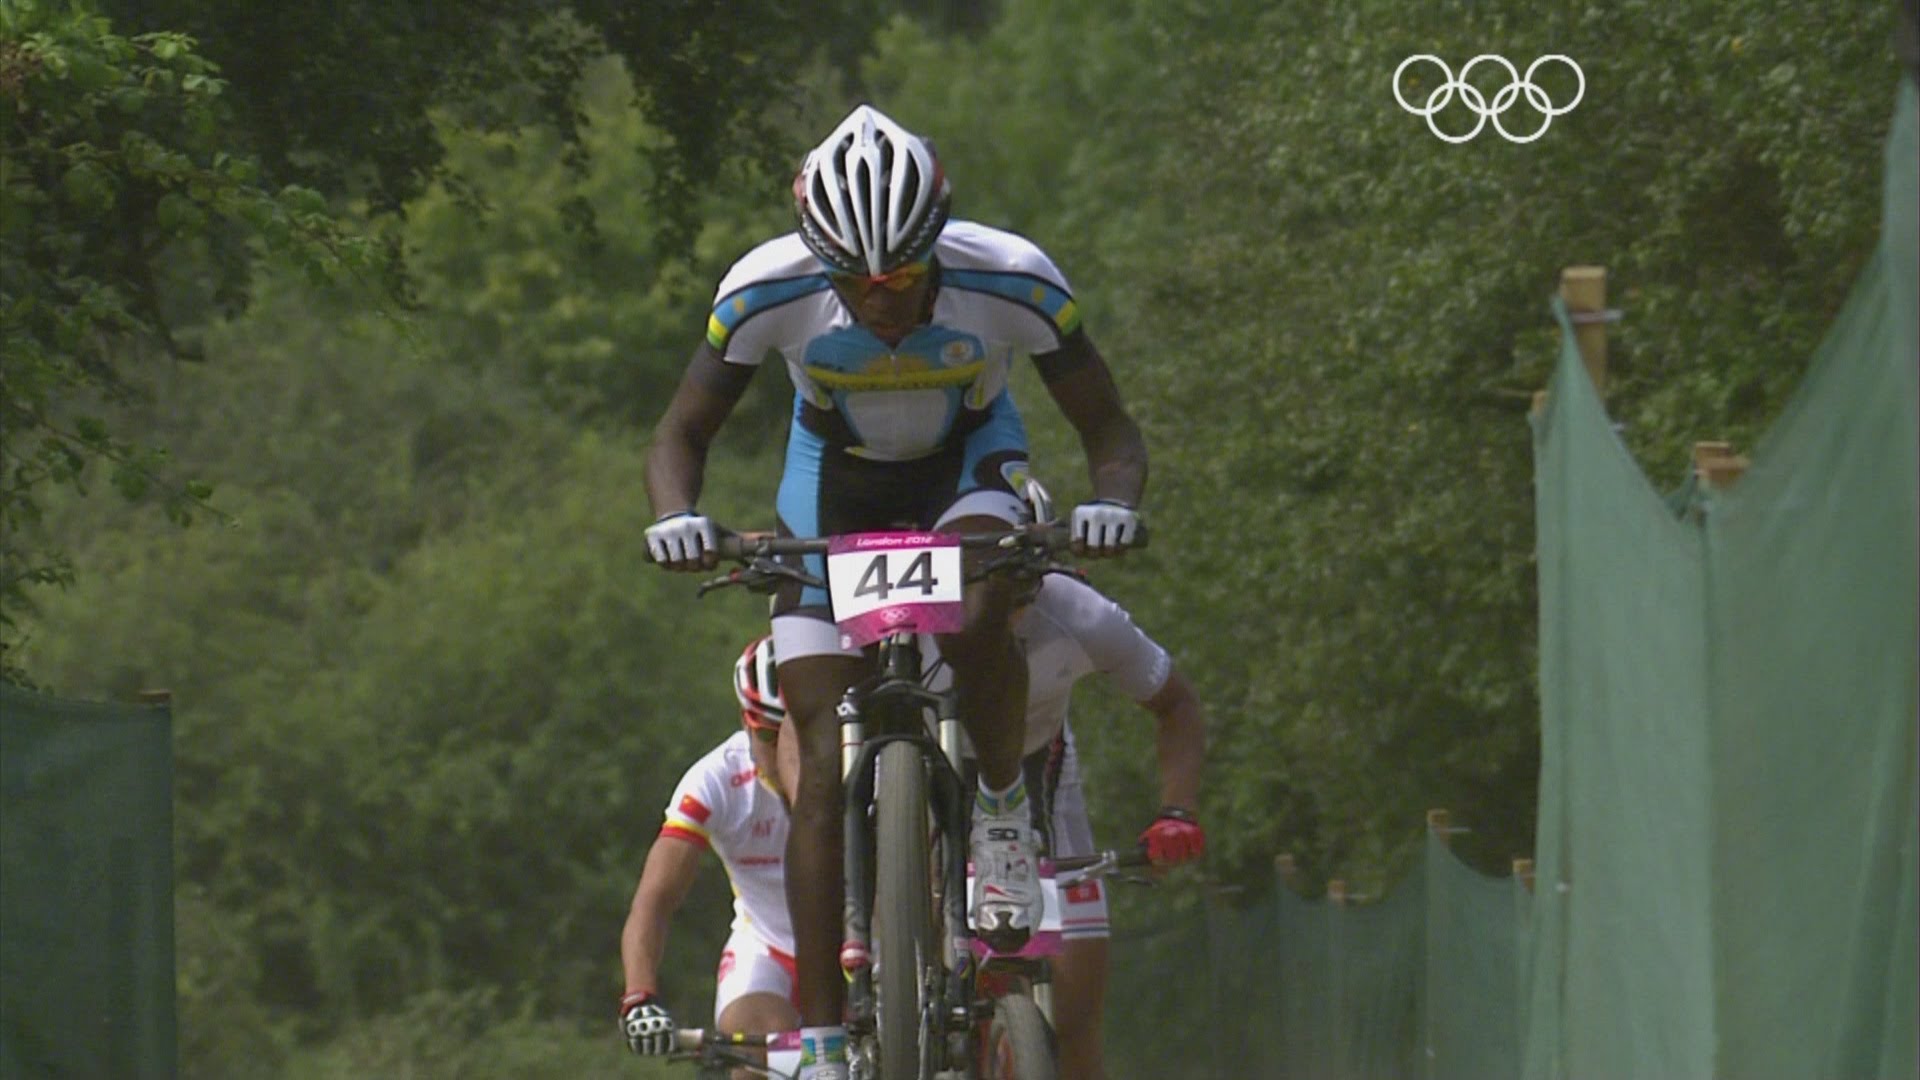 Mountain Biking at the Rio 2016 Olympic Games | Rules, Schedule, History, Preview and Everything You Need To Know About the Olympic Cross Country Mountain Biking…